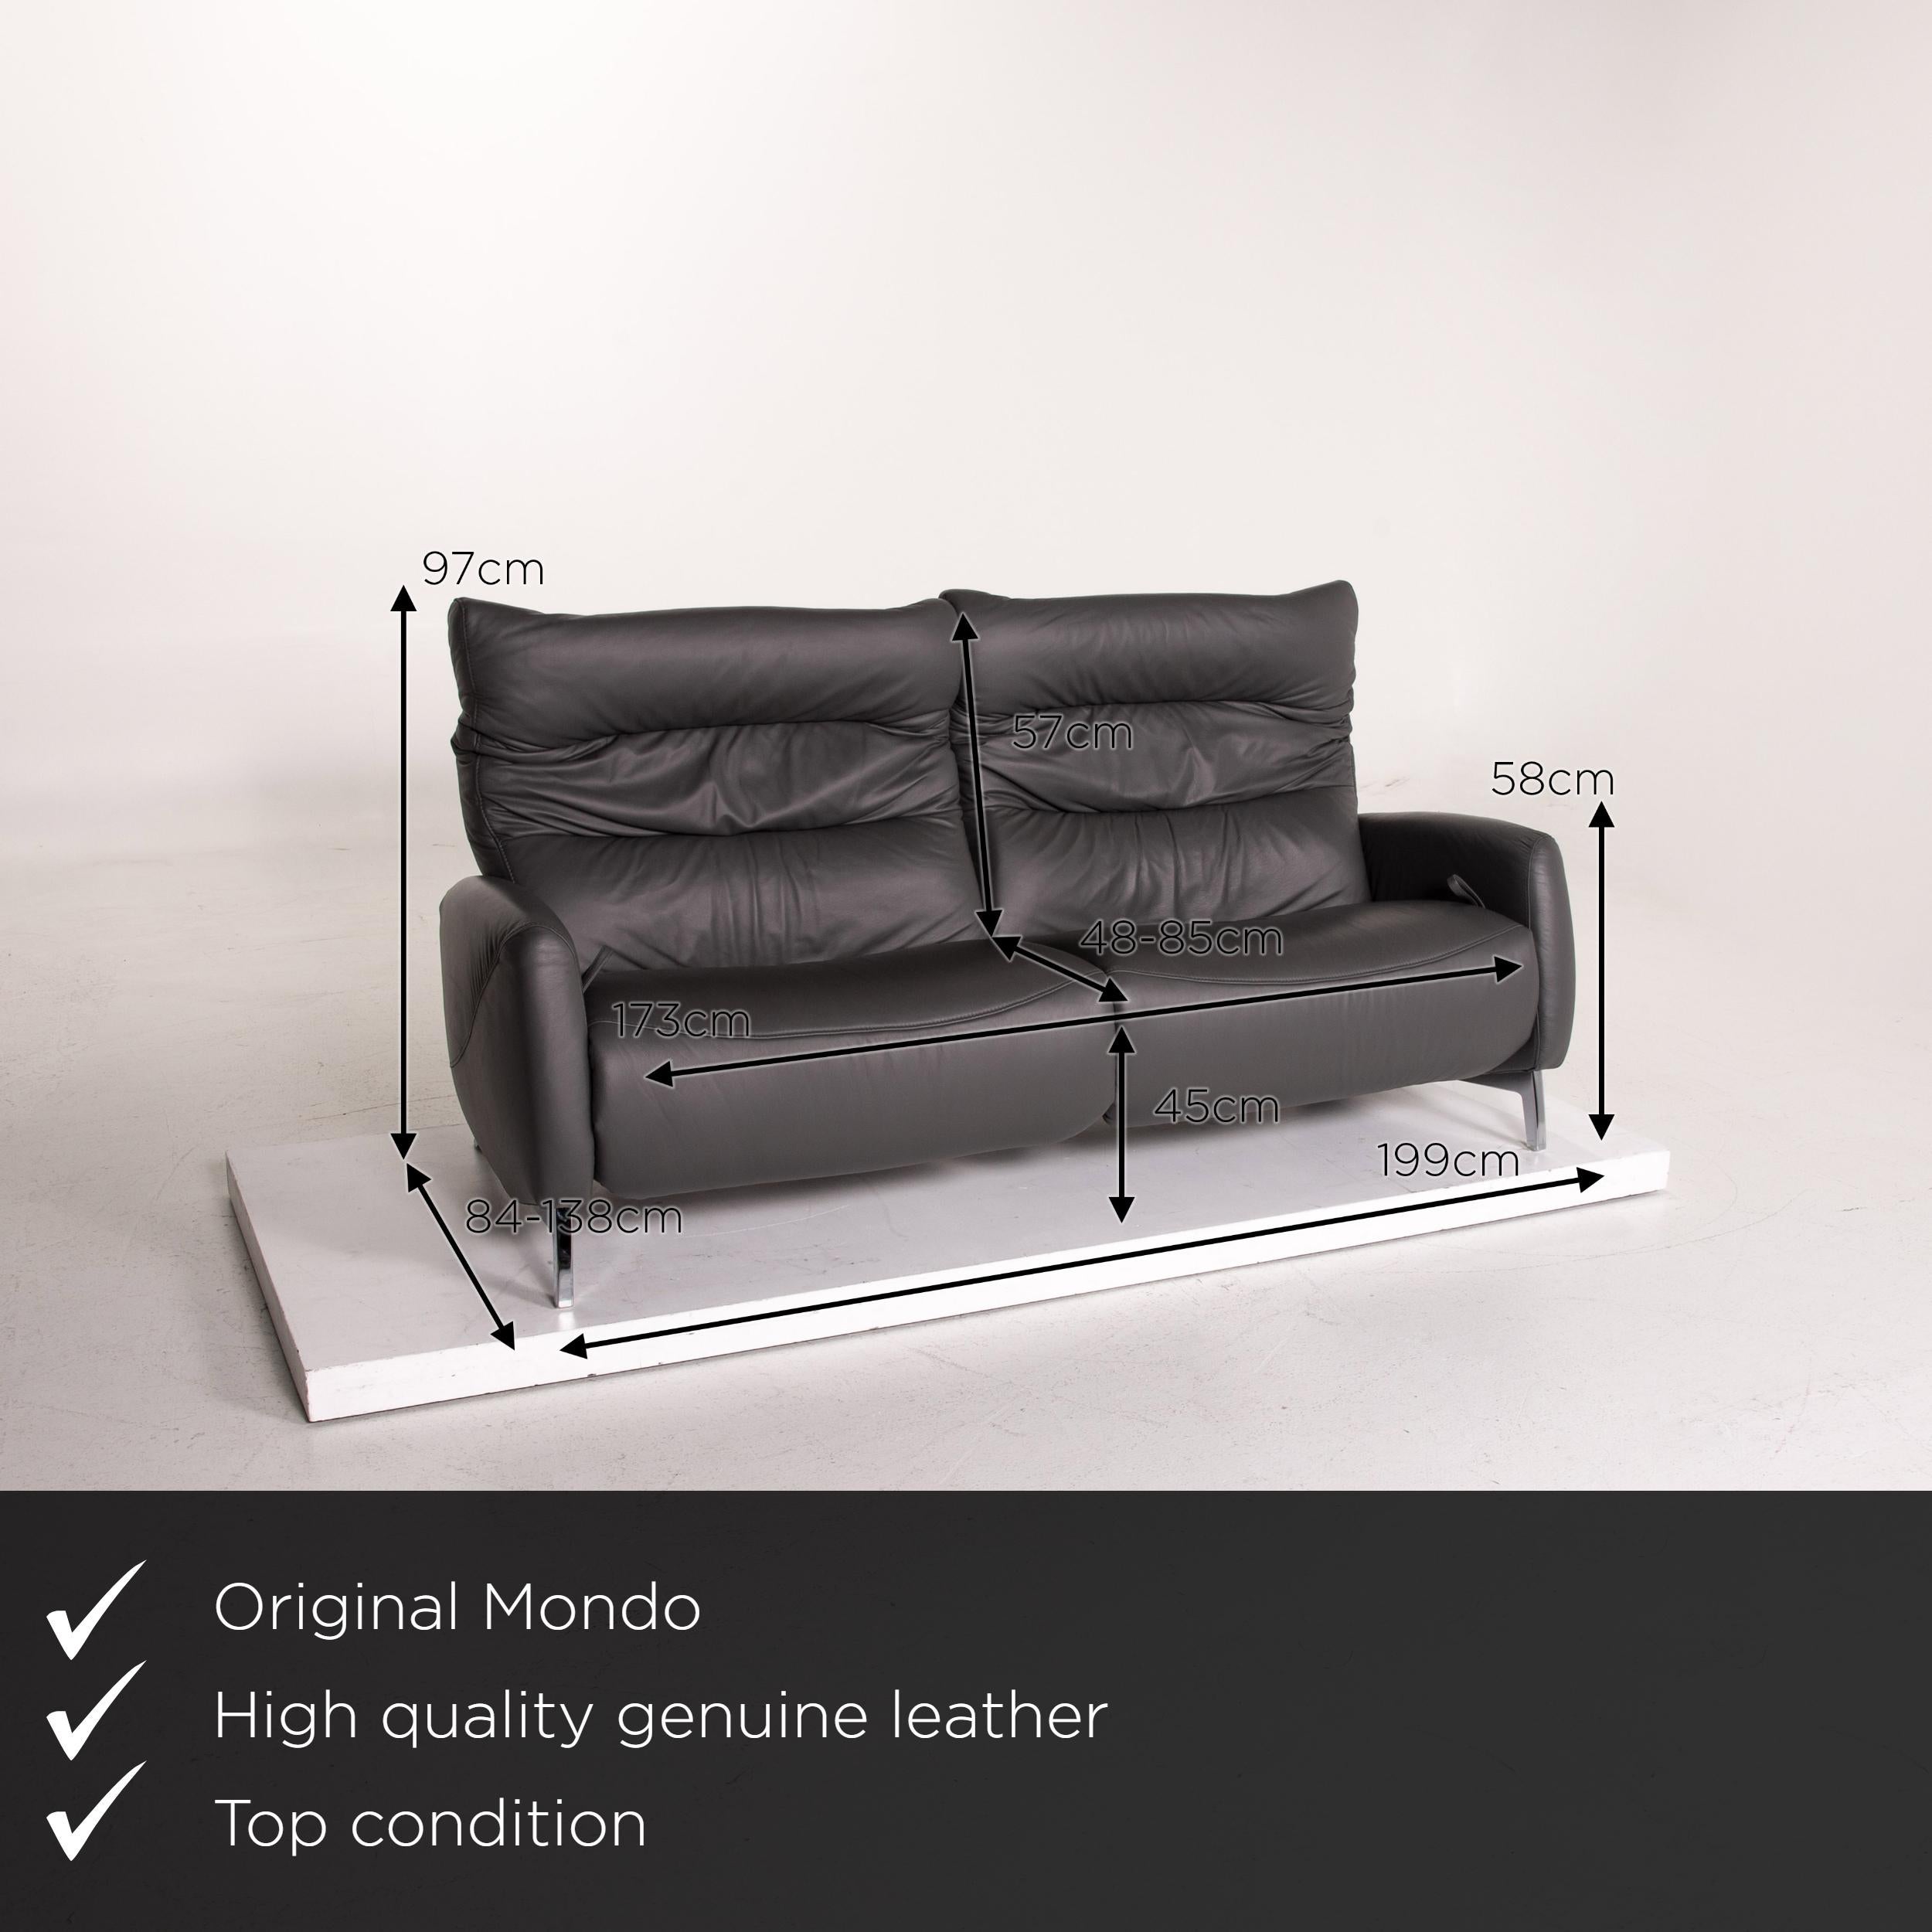 We present to you a Mondo Recero leather sofa gray two-seat function relax function couch.
   
 

 Product measurements in centimeters:
 

Depth 84
Width 199
Height 97
Seat height 45
Rest height 58
Seat depth 48
Seat width 173
Back